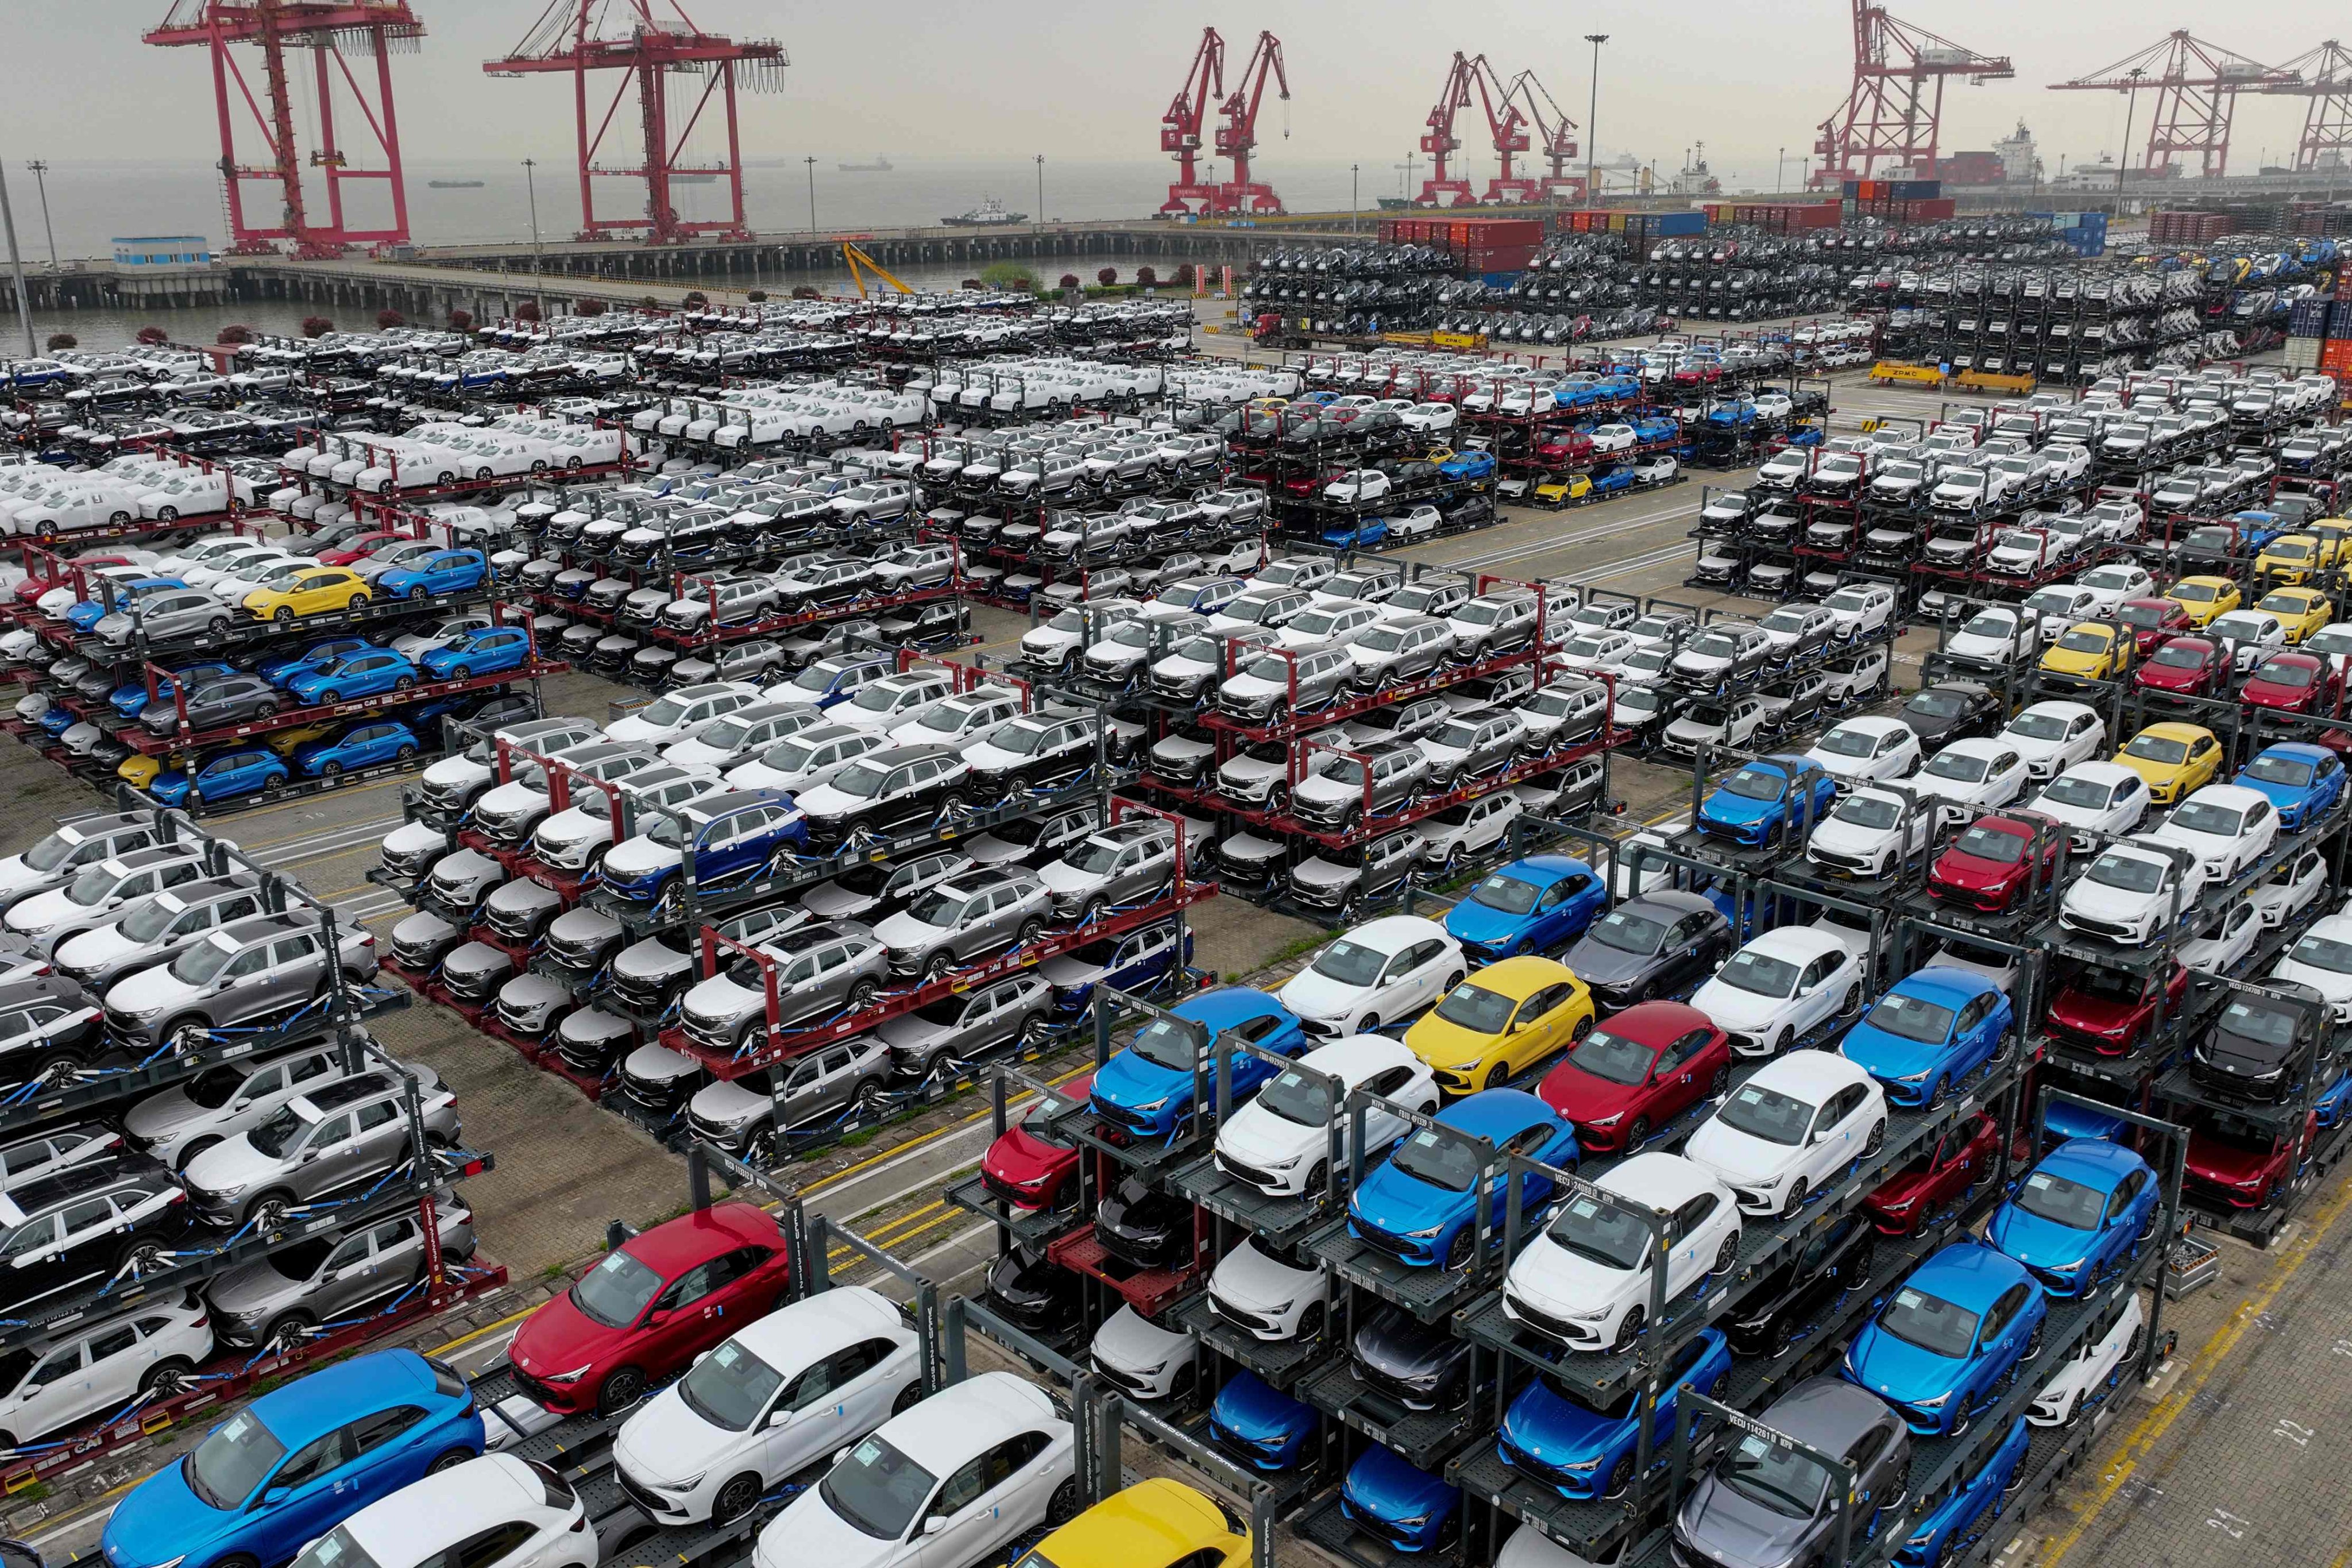 Electric cars are lined up for export at Taicang Port in Suzhou, in China’s eastern Jiangsu province, on April 16. The West did not complain about China’s overcapacity in the past because it was good for them. It’s a different picture now. Photo: AFP